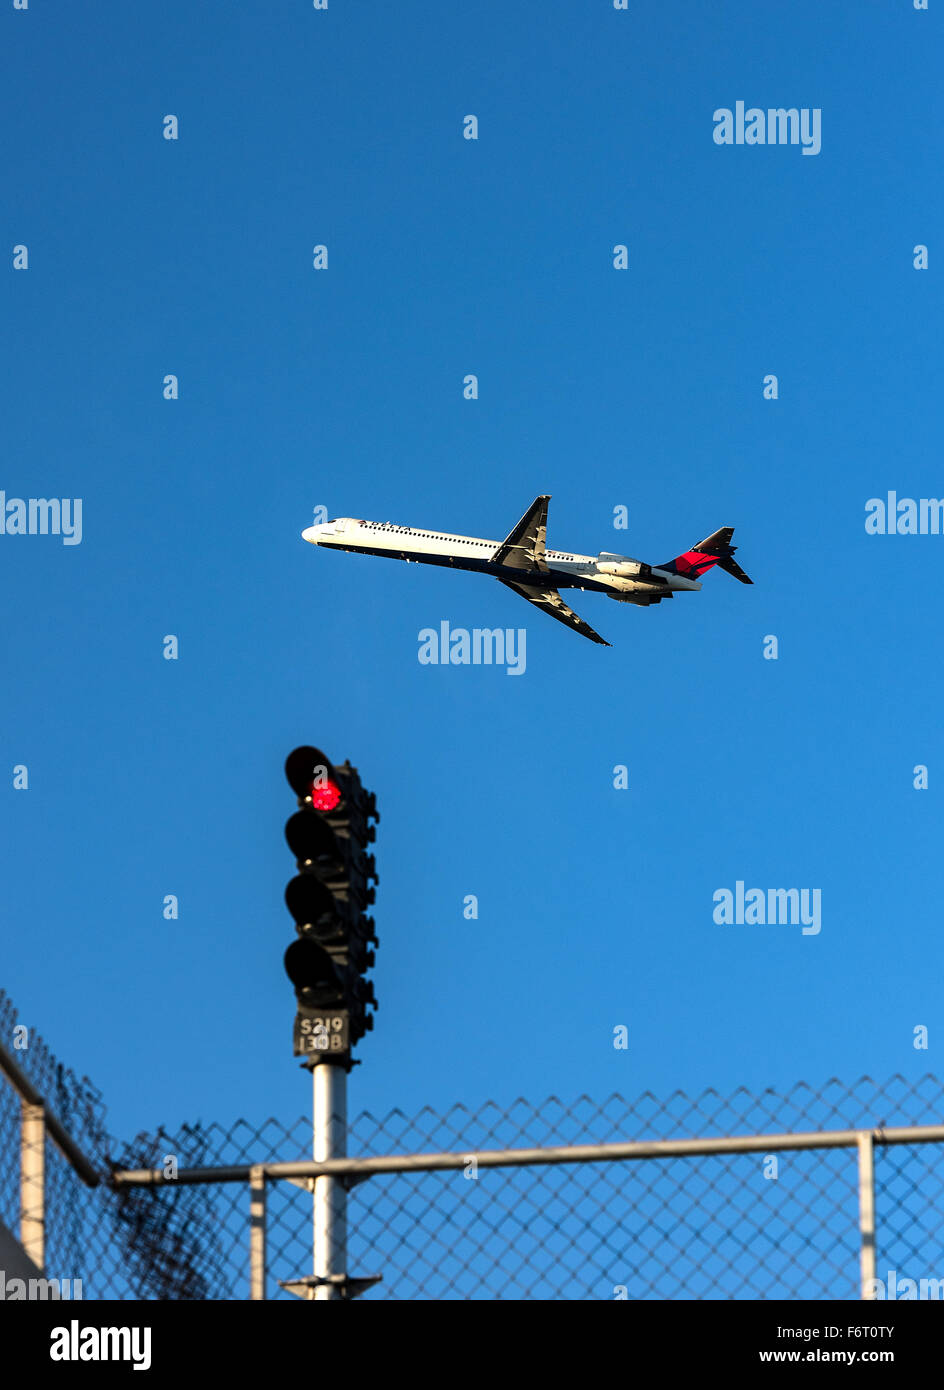 Delta Airline jet taking off from the Atlanta airport hub, Georgia, USA Stock Photo